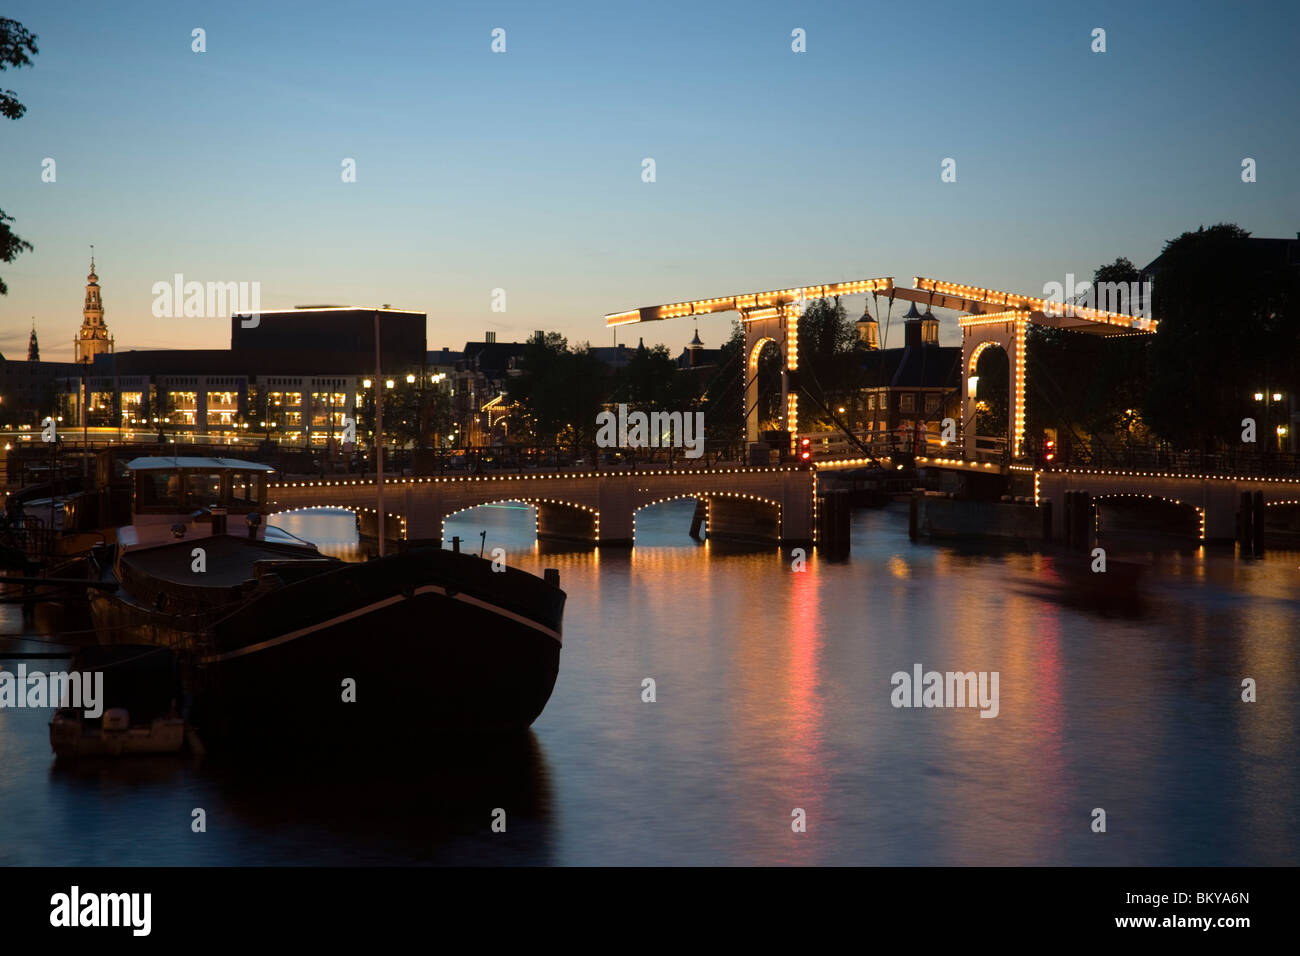 Boats, Magere Brug, Amstel, View over illuminated Magere Brug Skinny Bridge, to Stopera and Zuiderkerk at night, Amsterdam, Holl Stock Photo